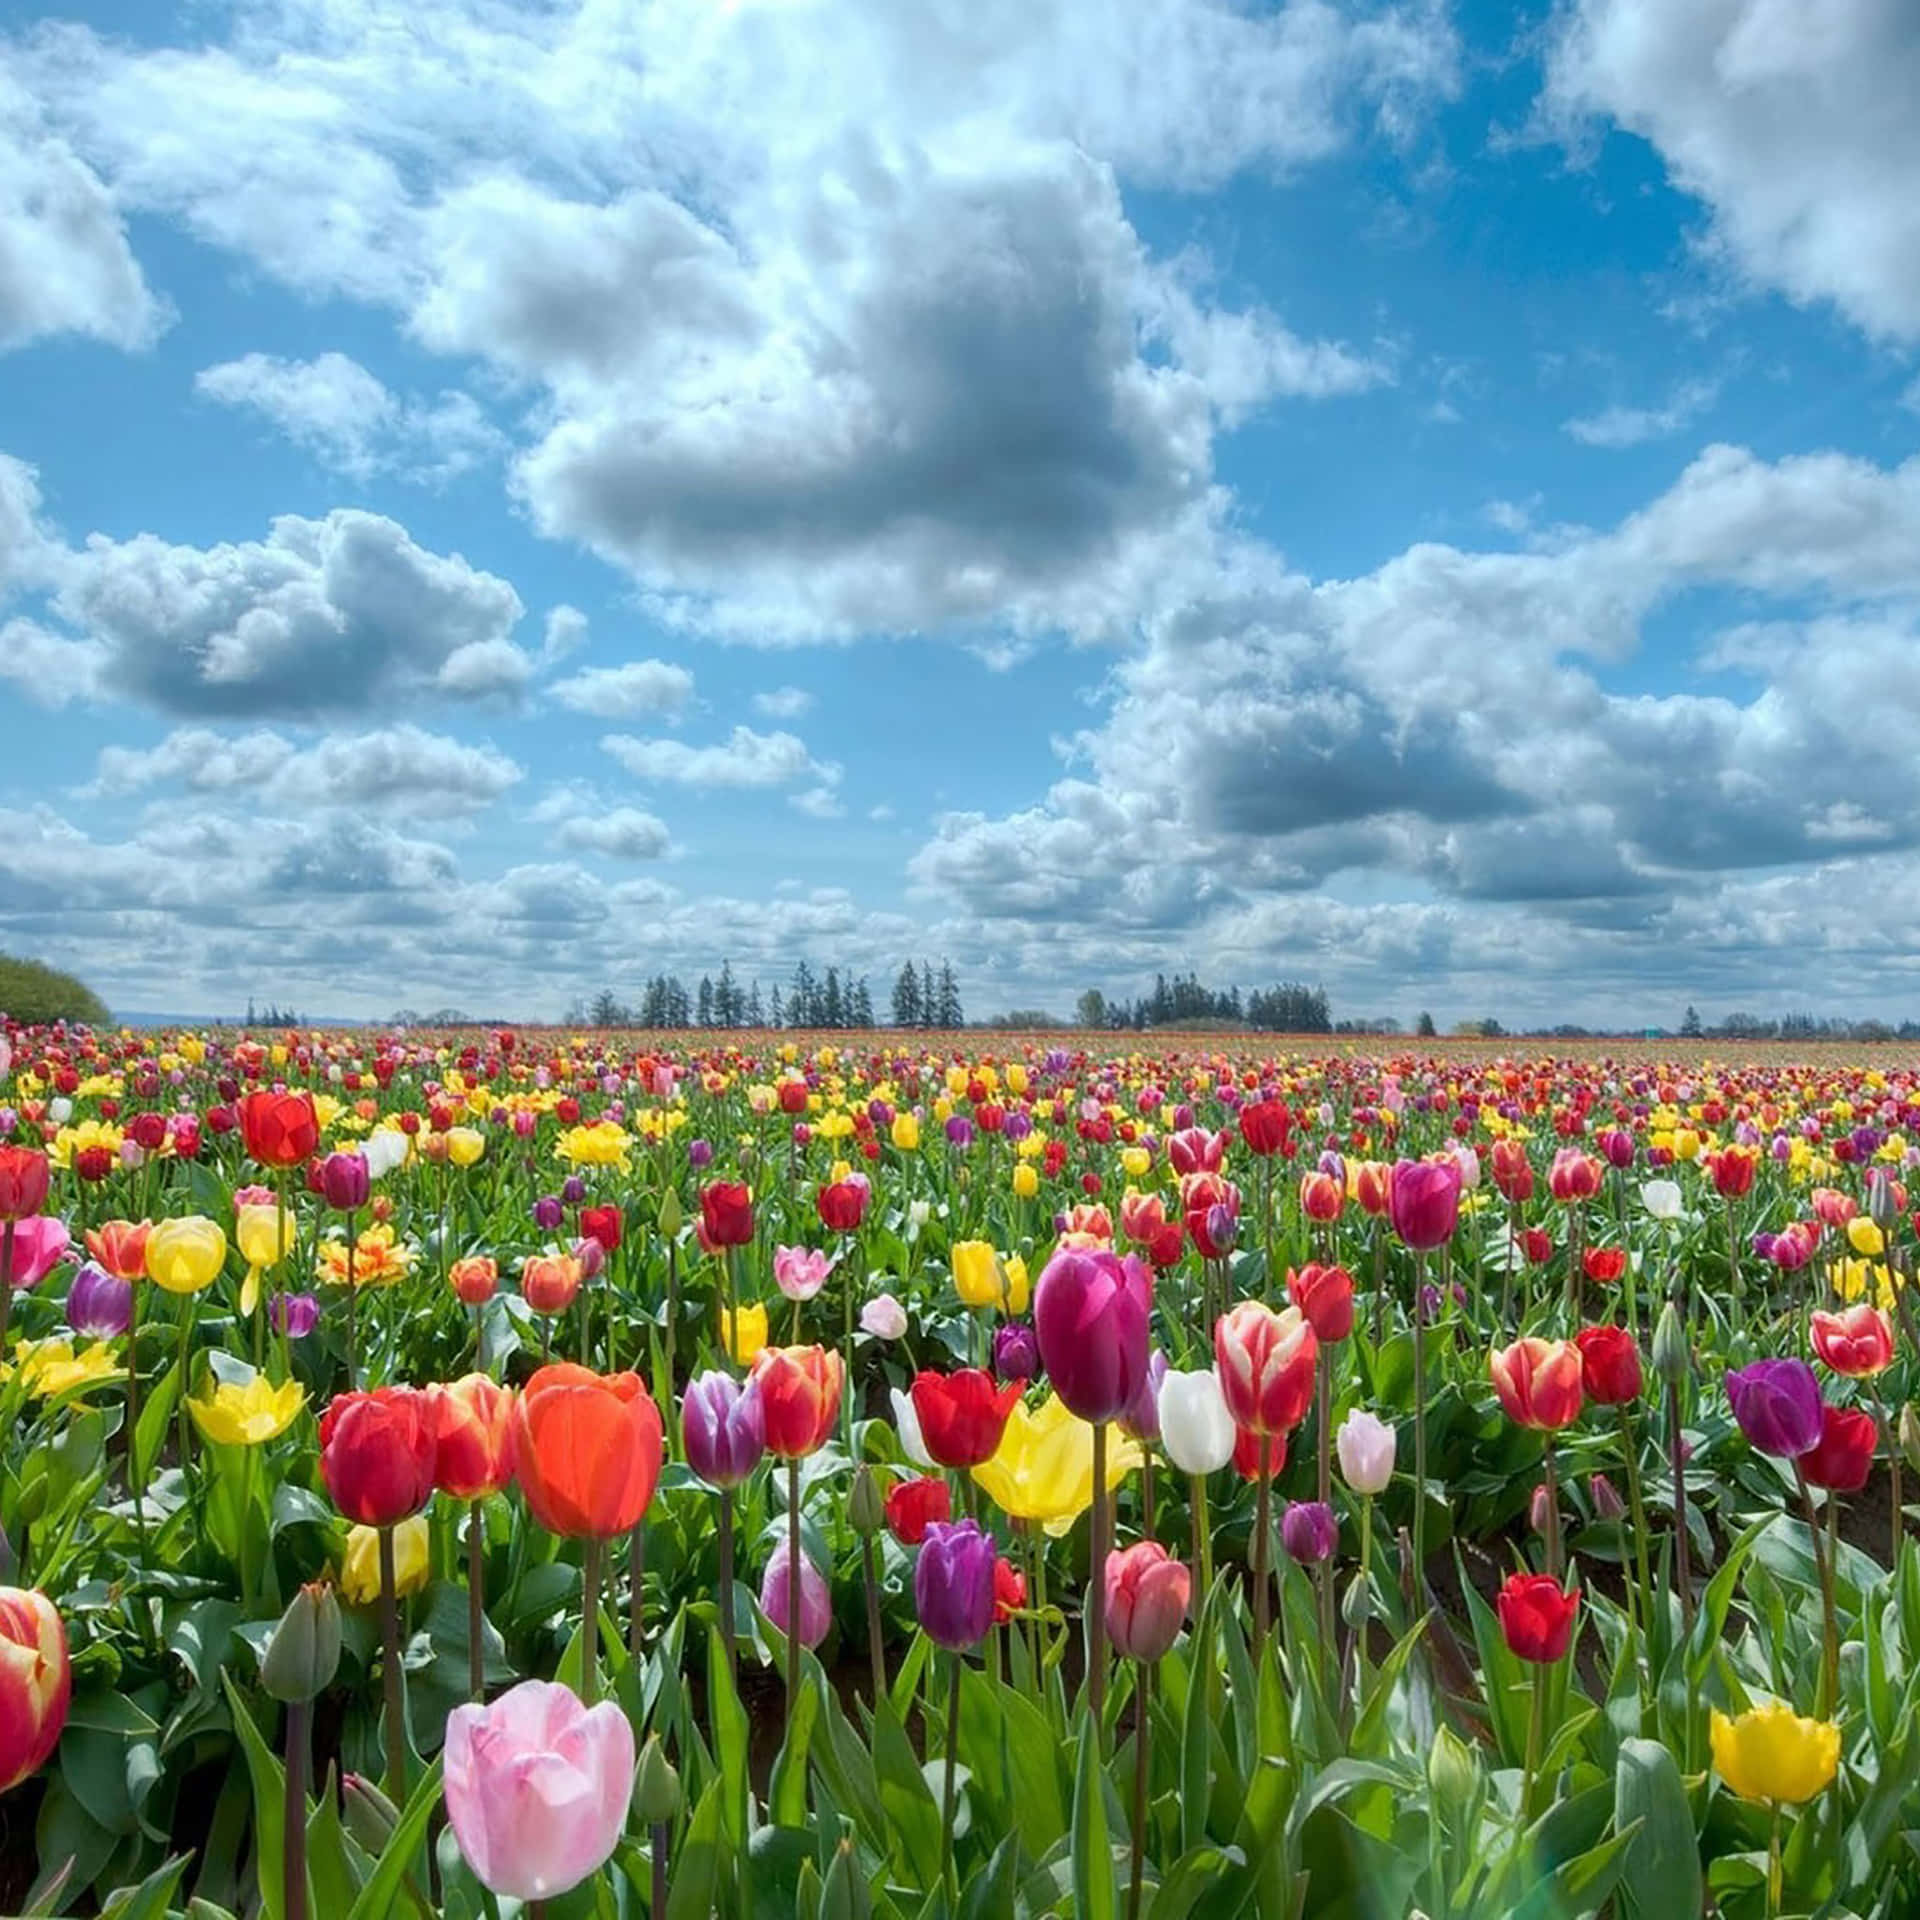 Tulips In Bloom In A Field With Clouds Wallpaper